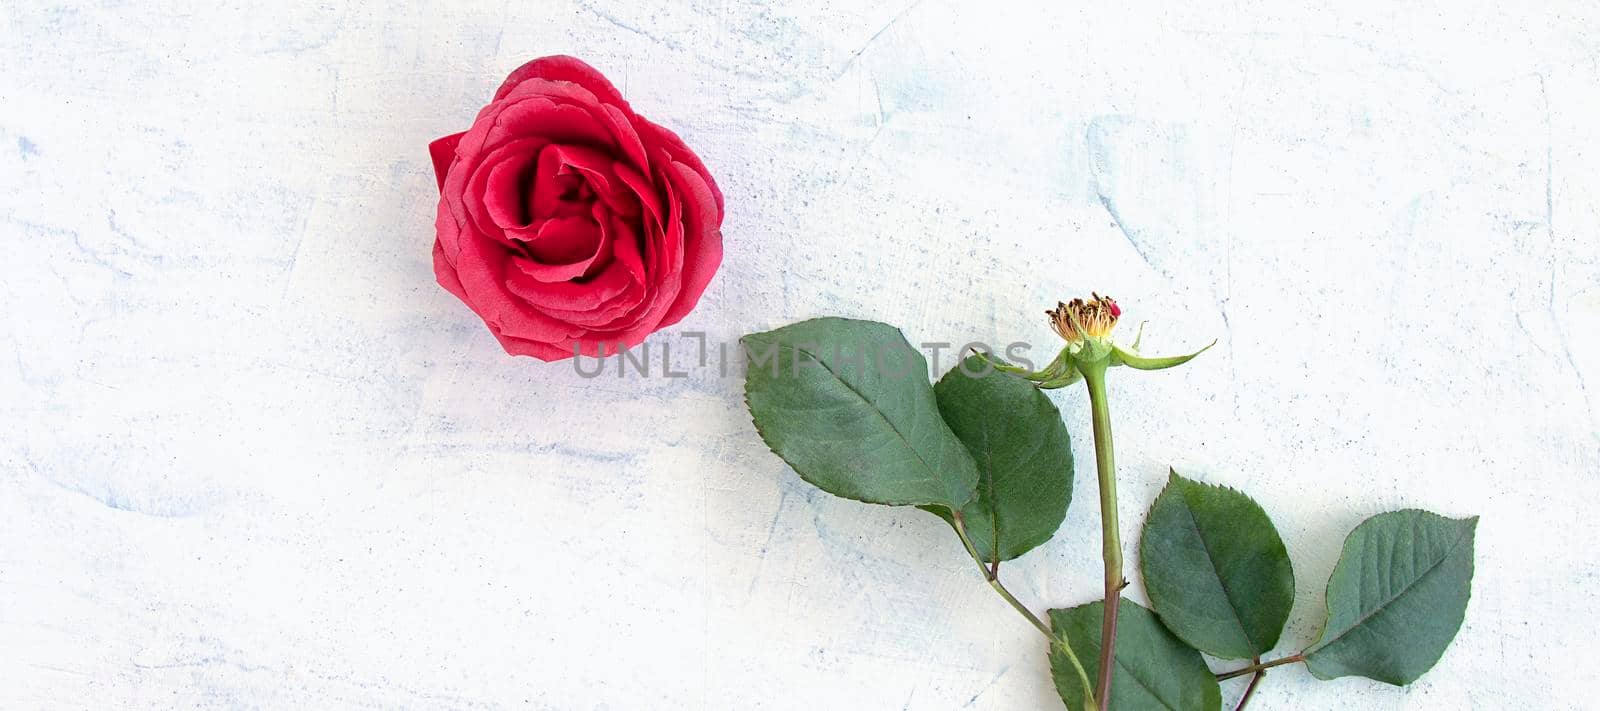 banner with scarlet rose with green leaves. rose petals of bud, separated from stem and leaves on textured background. top view and side view at the same time. broken heart or loss of mind symbol